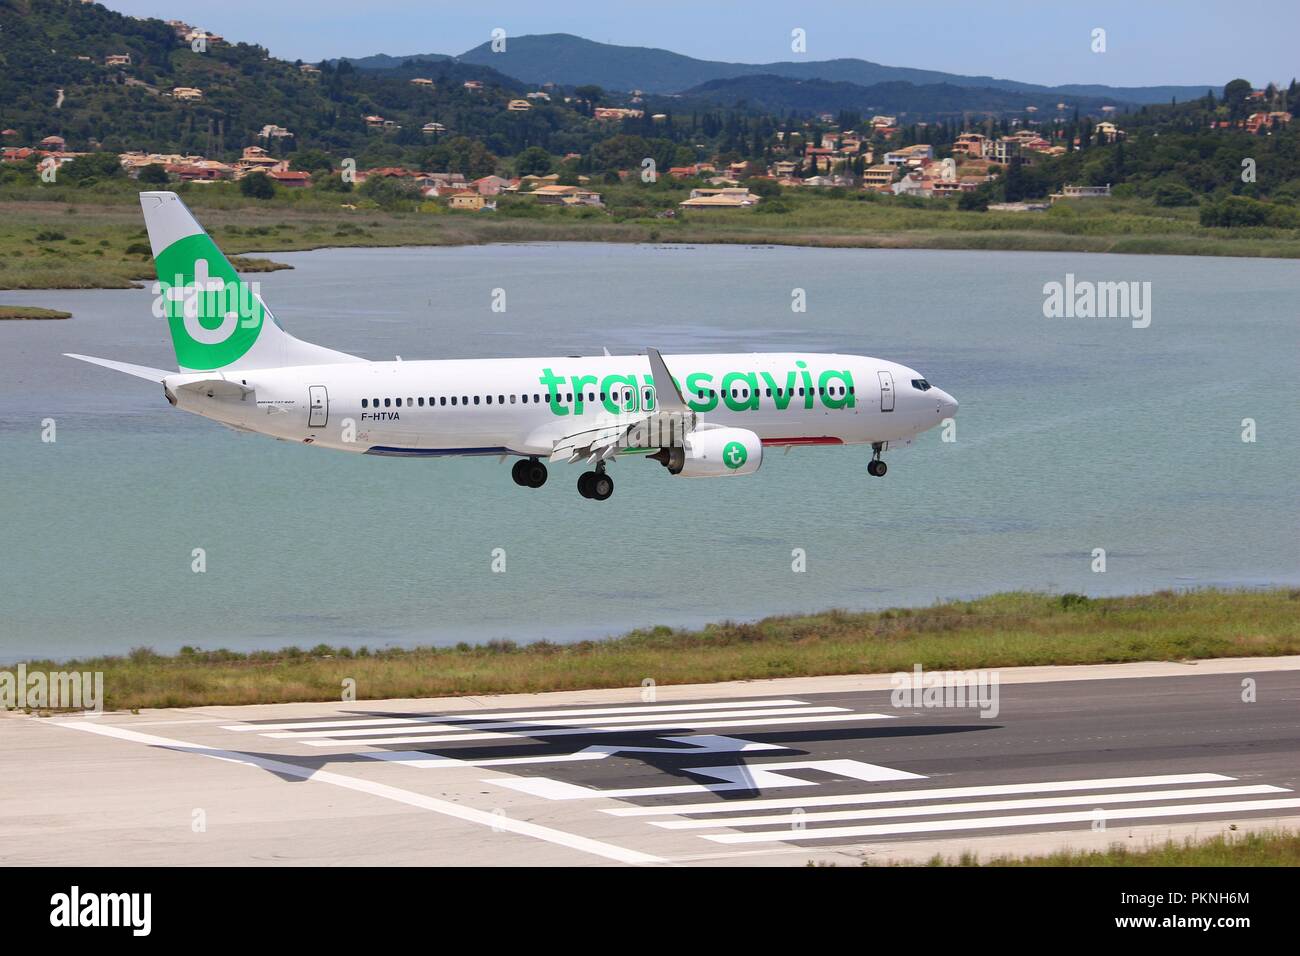 CORFU, GREECE - JUNE 5, 2016: Transavia Boeing 737-800 arrives at Corfu International Airport, Greece. Transavia is a Dutch low-cost airline owned by  Stock Photo